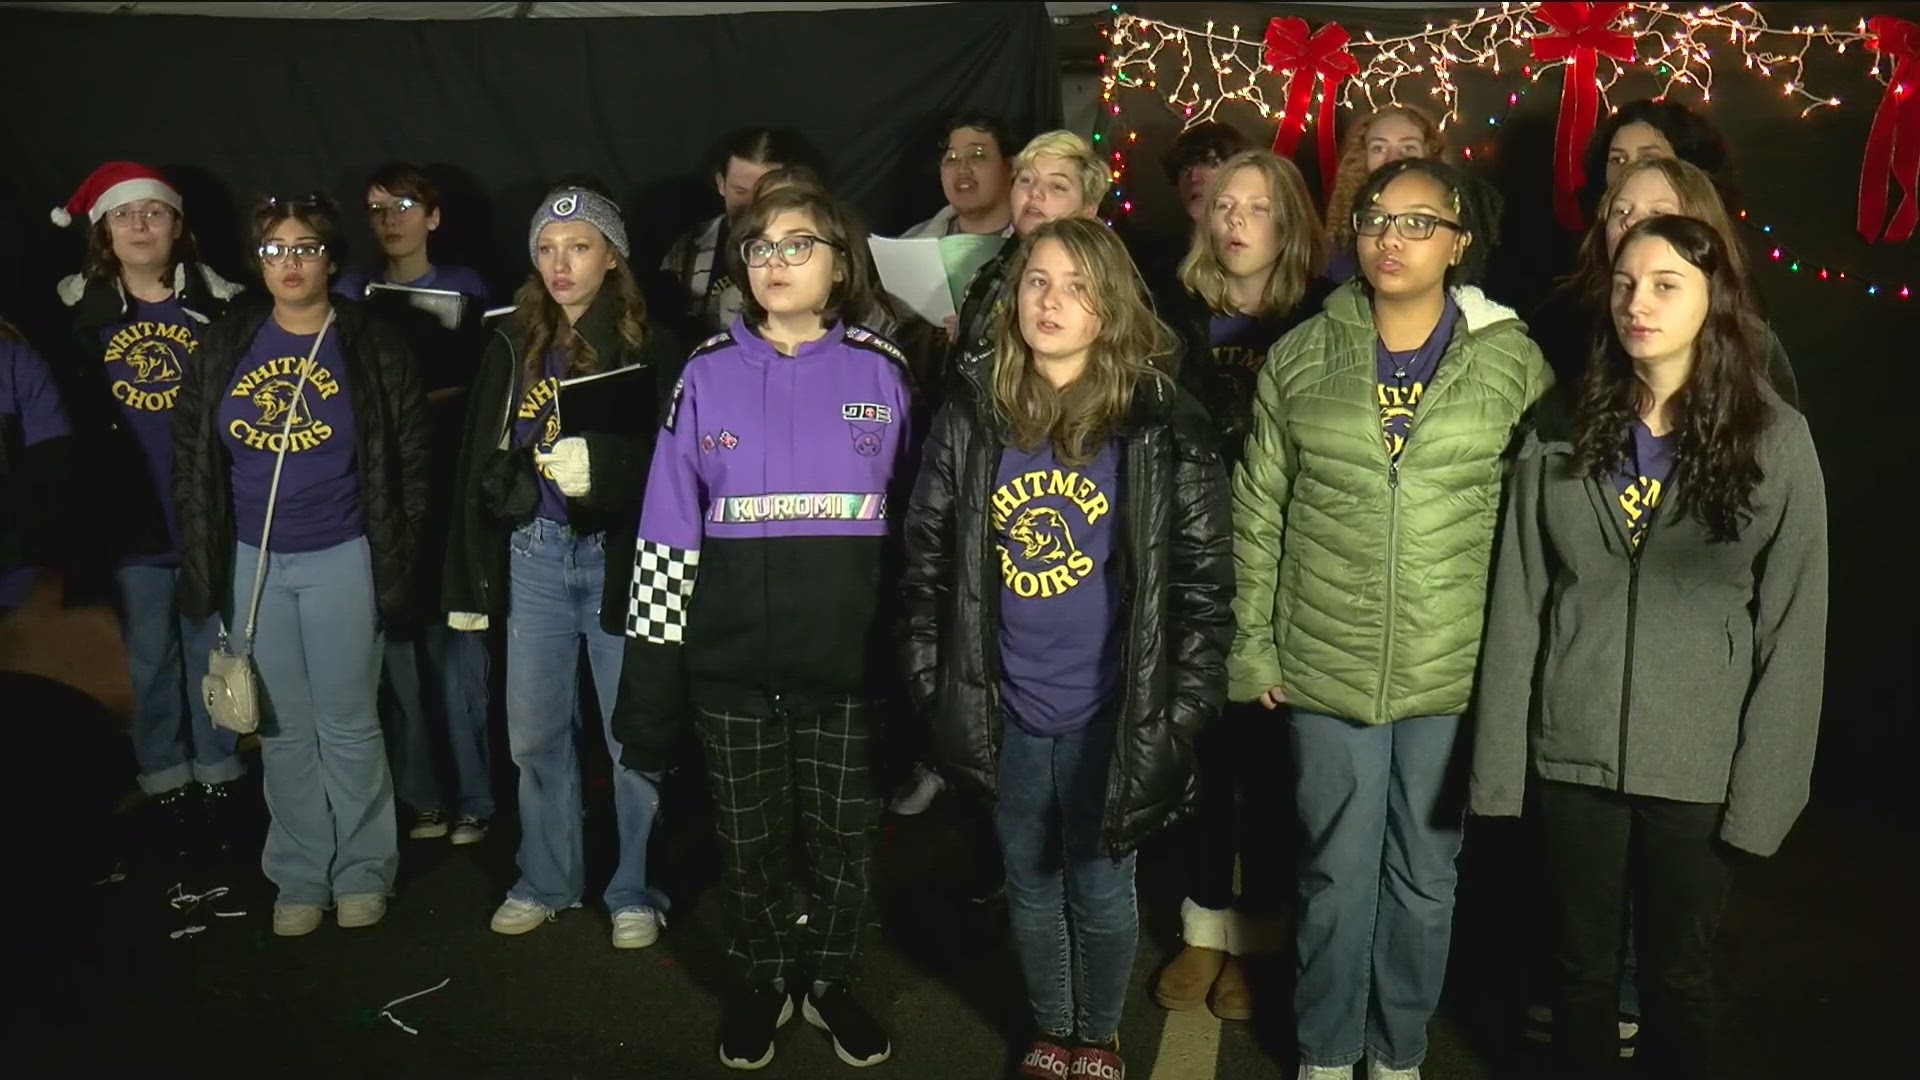 The Whitmer High School choirs entertained the crowds at Thursday's toy drive event.